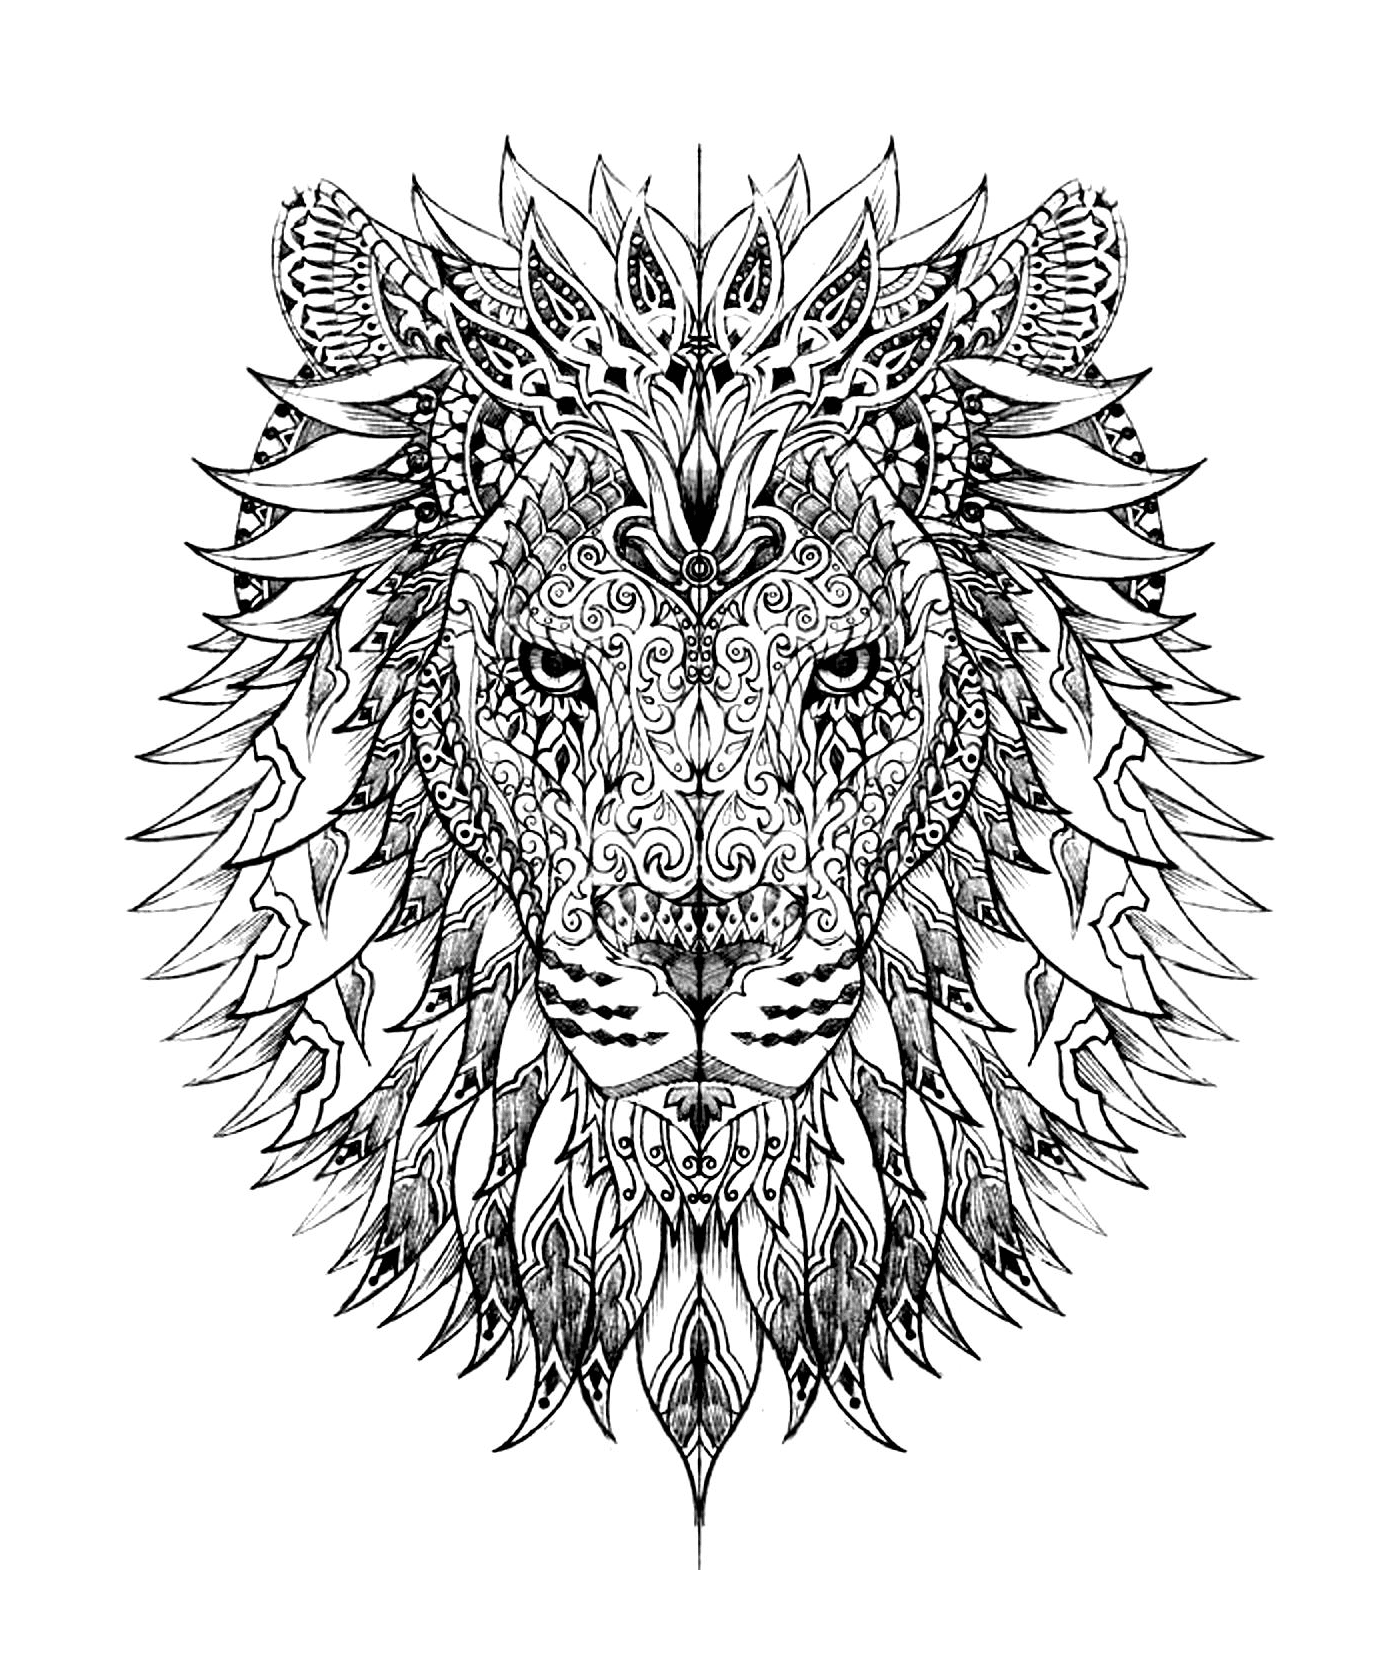  The head of a complex lion 